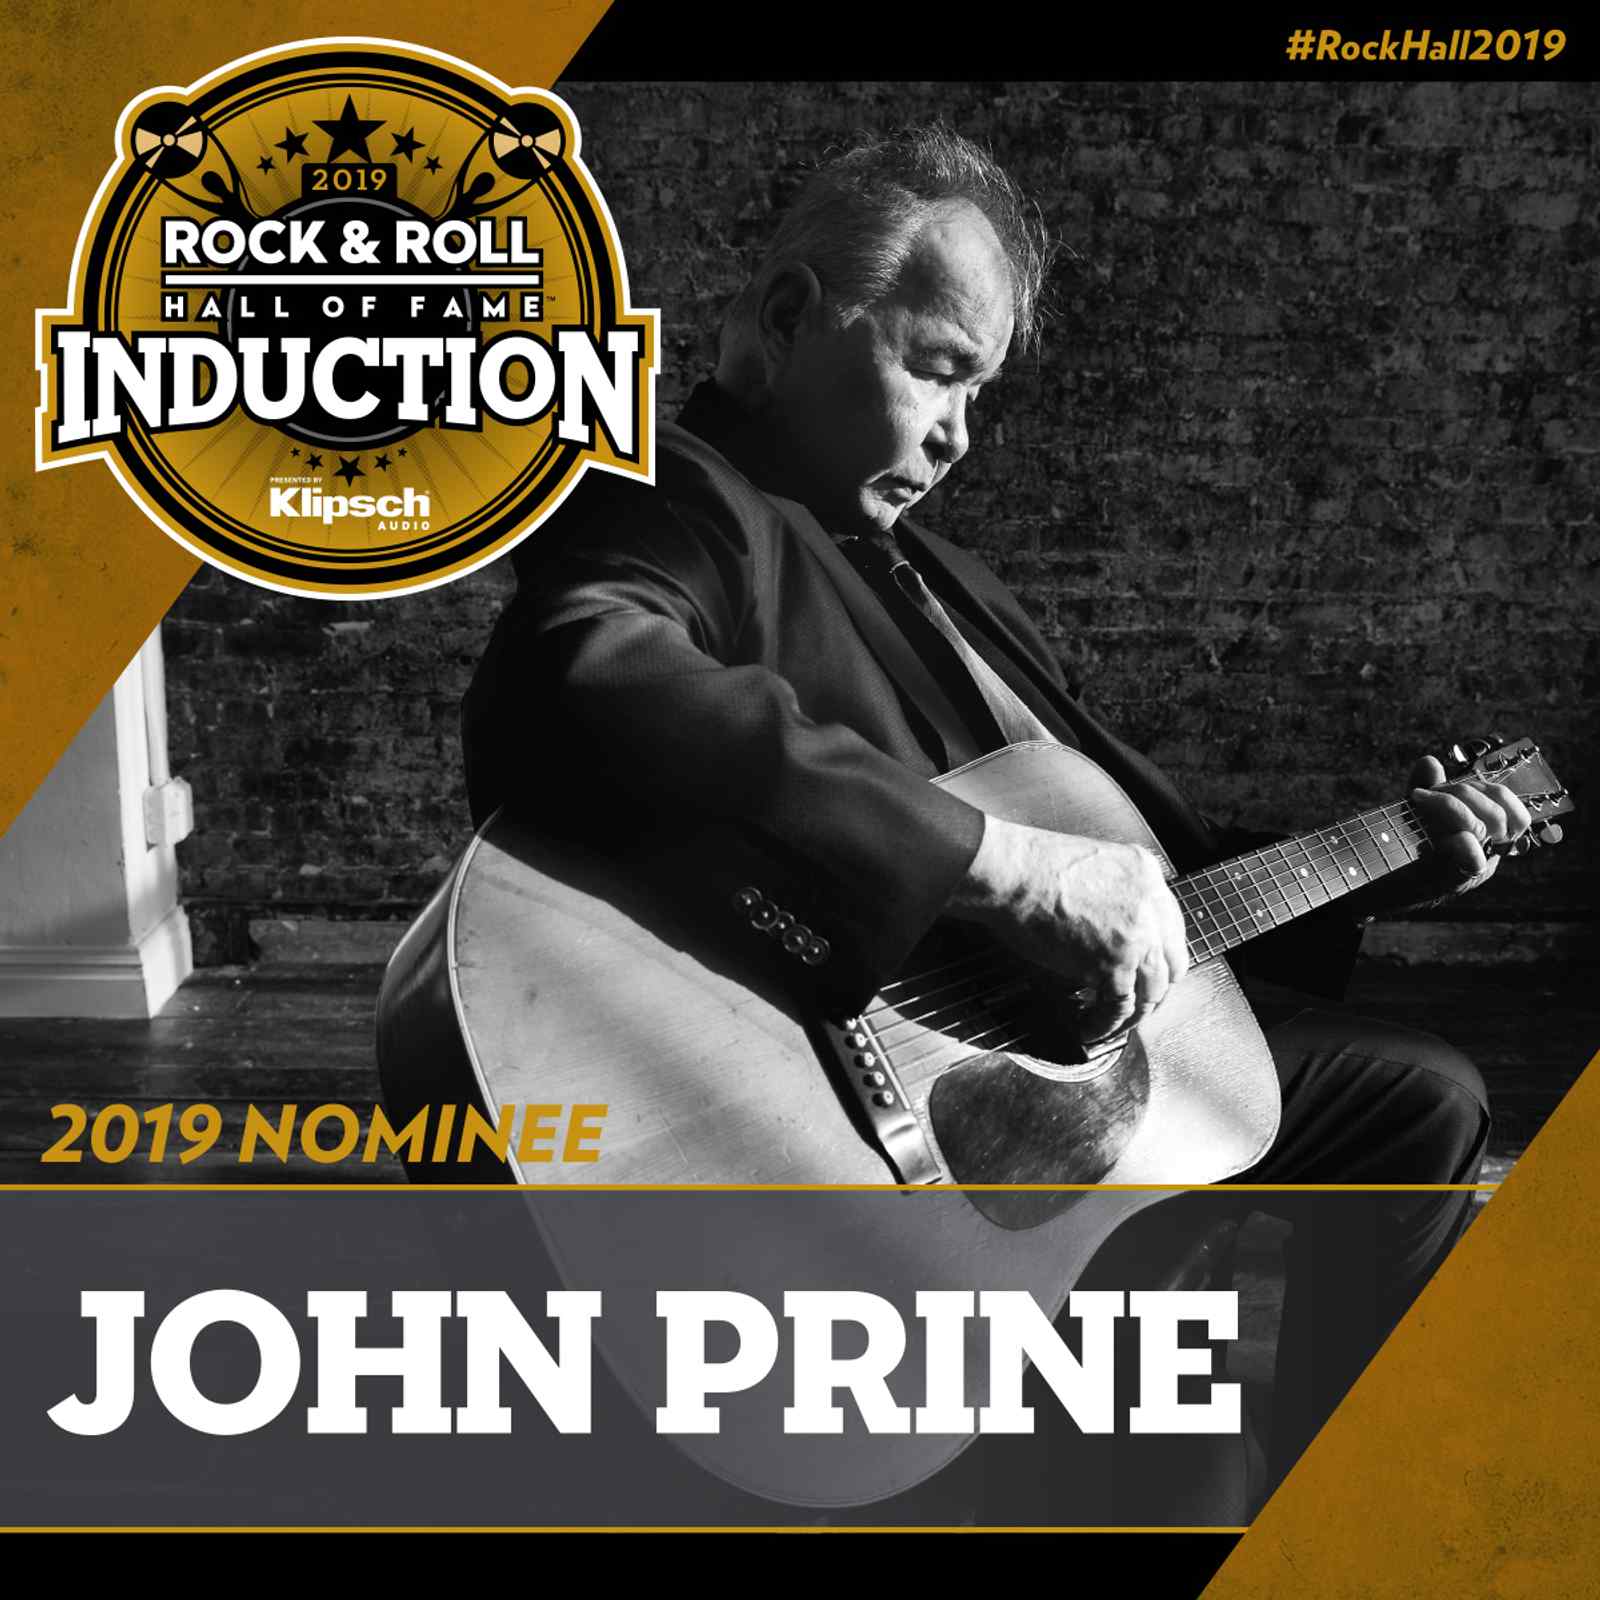 John Prine Nominated for 2019 Rock & Roll Hall of Fame